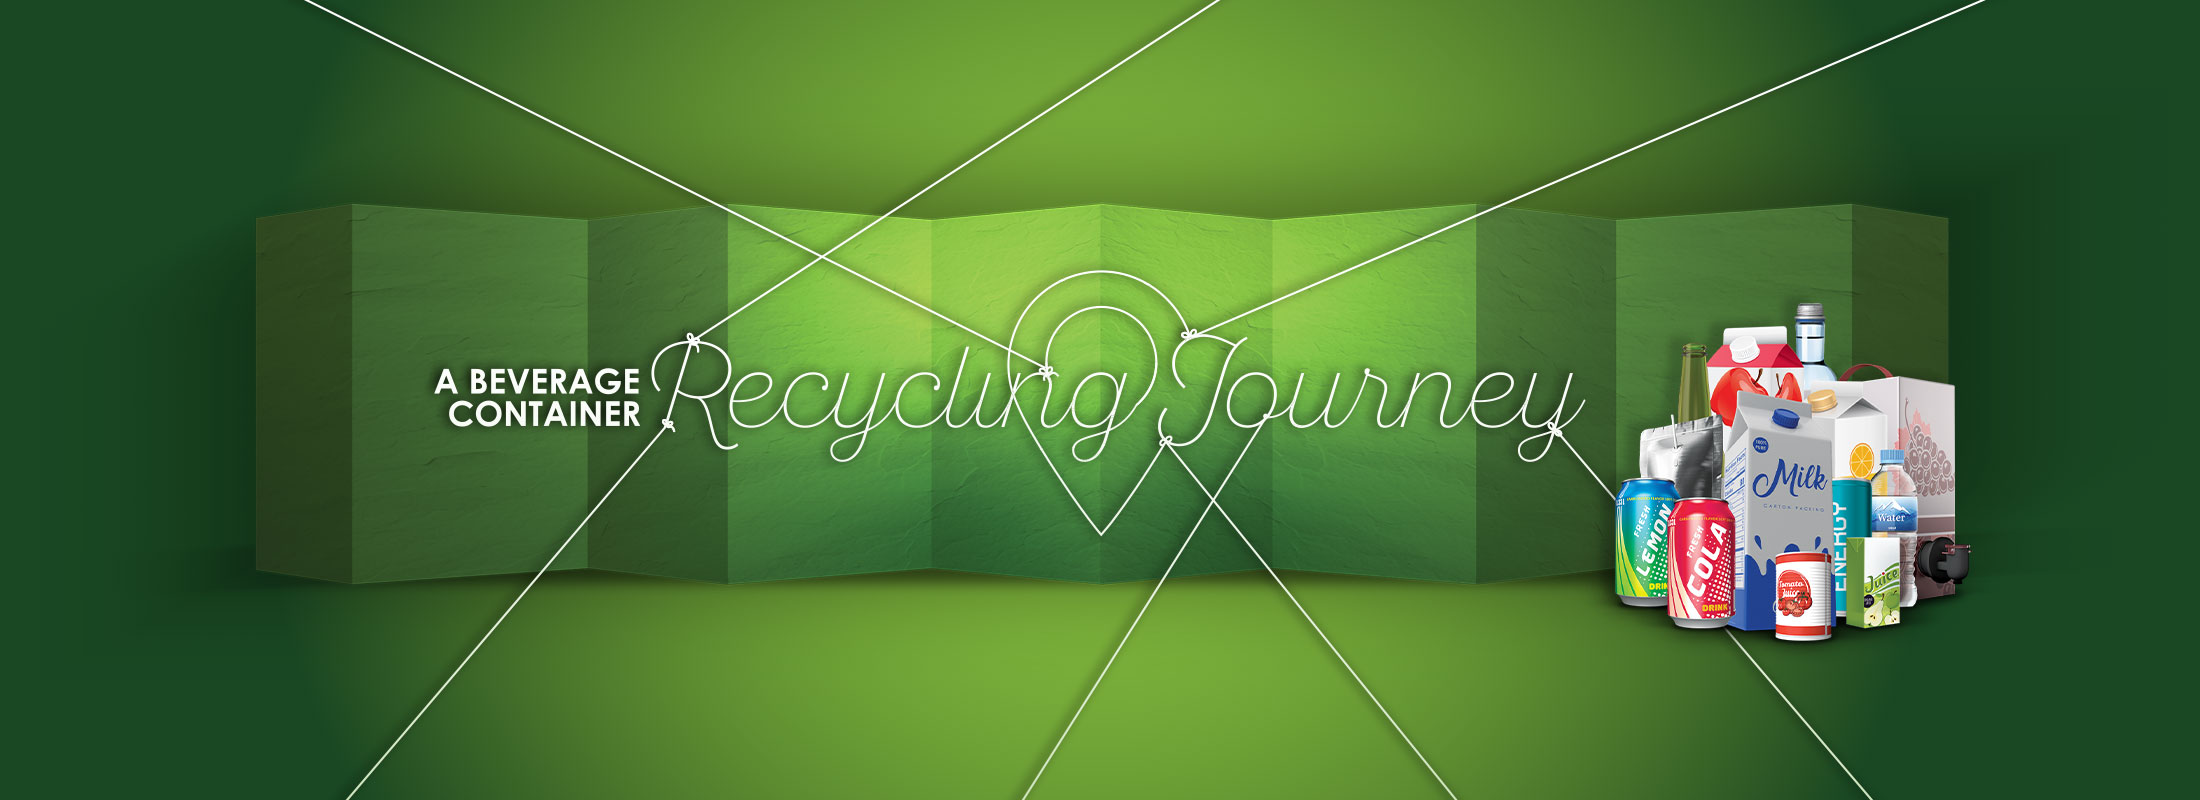 Recycling Journey